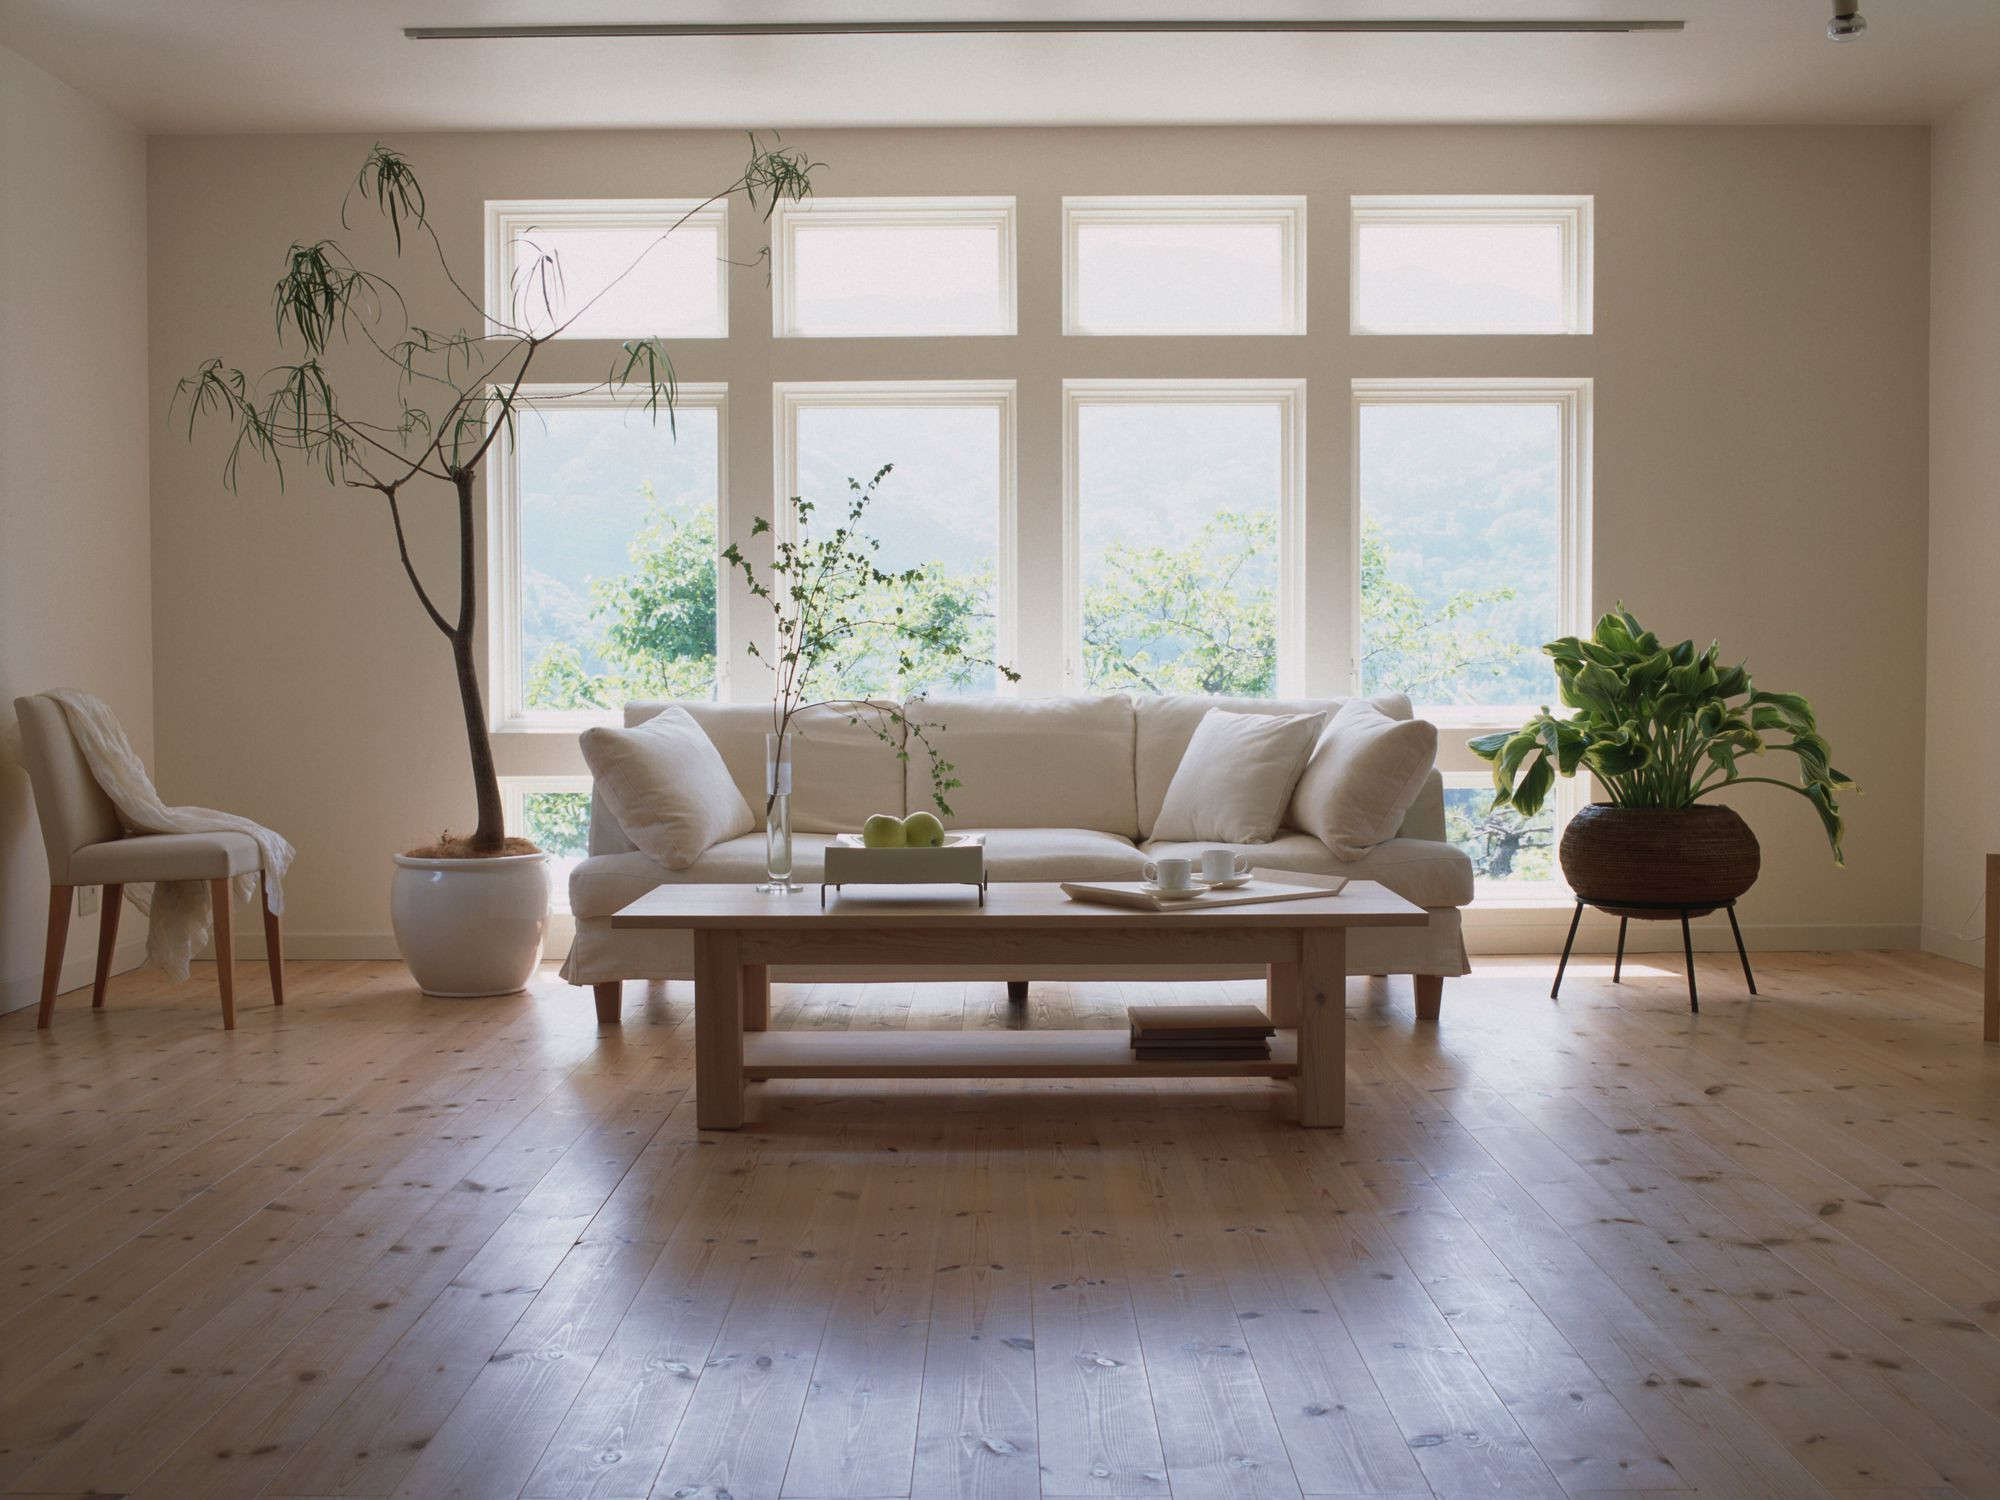 15 Awesome Knoxville Hardwood Floor Refinishing 2024 free download knoxville hardwood floor refinishing of laminate flooring pros and cons regarding living room laminate floor gettyimages dexph070 001 58b5cc793df78cdcd8be2938